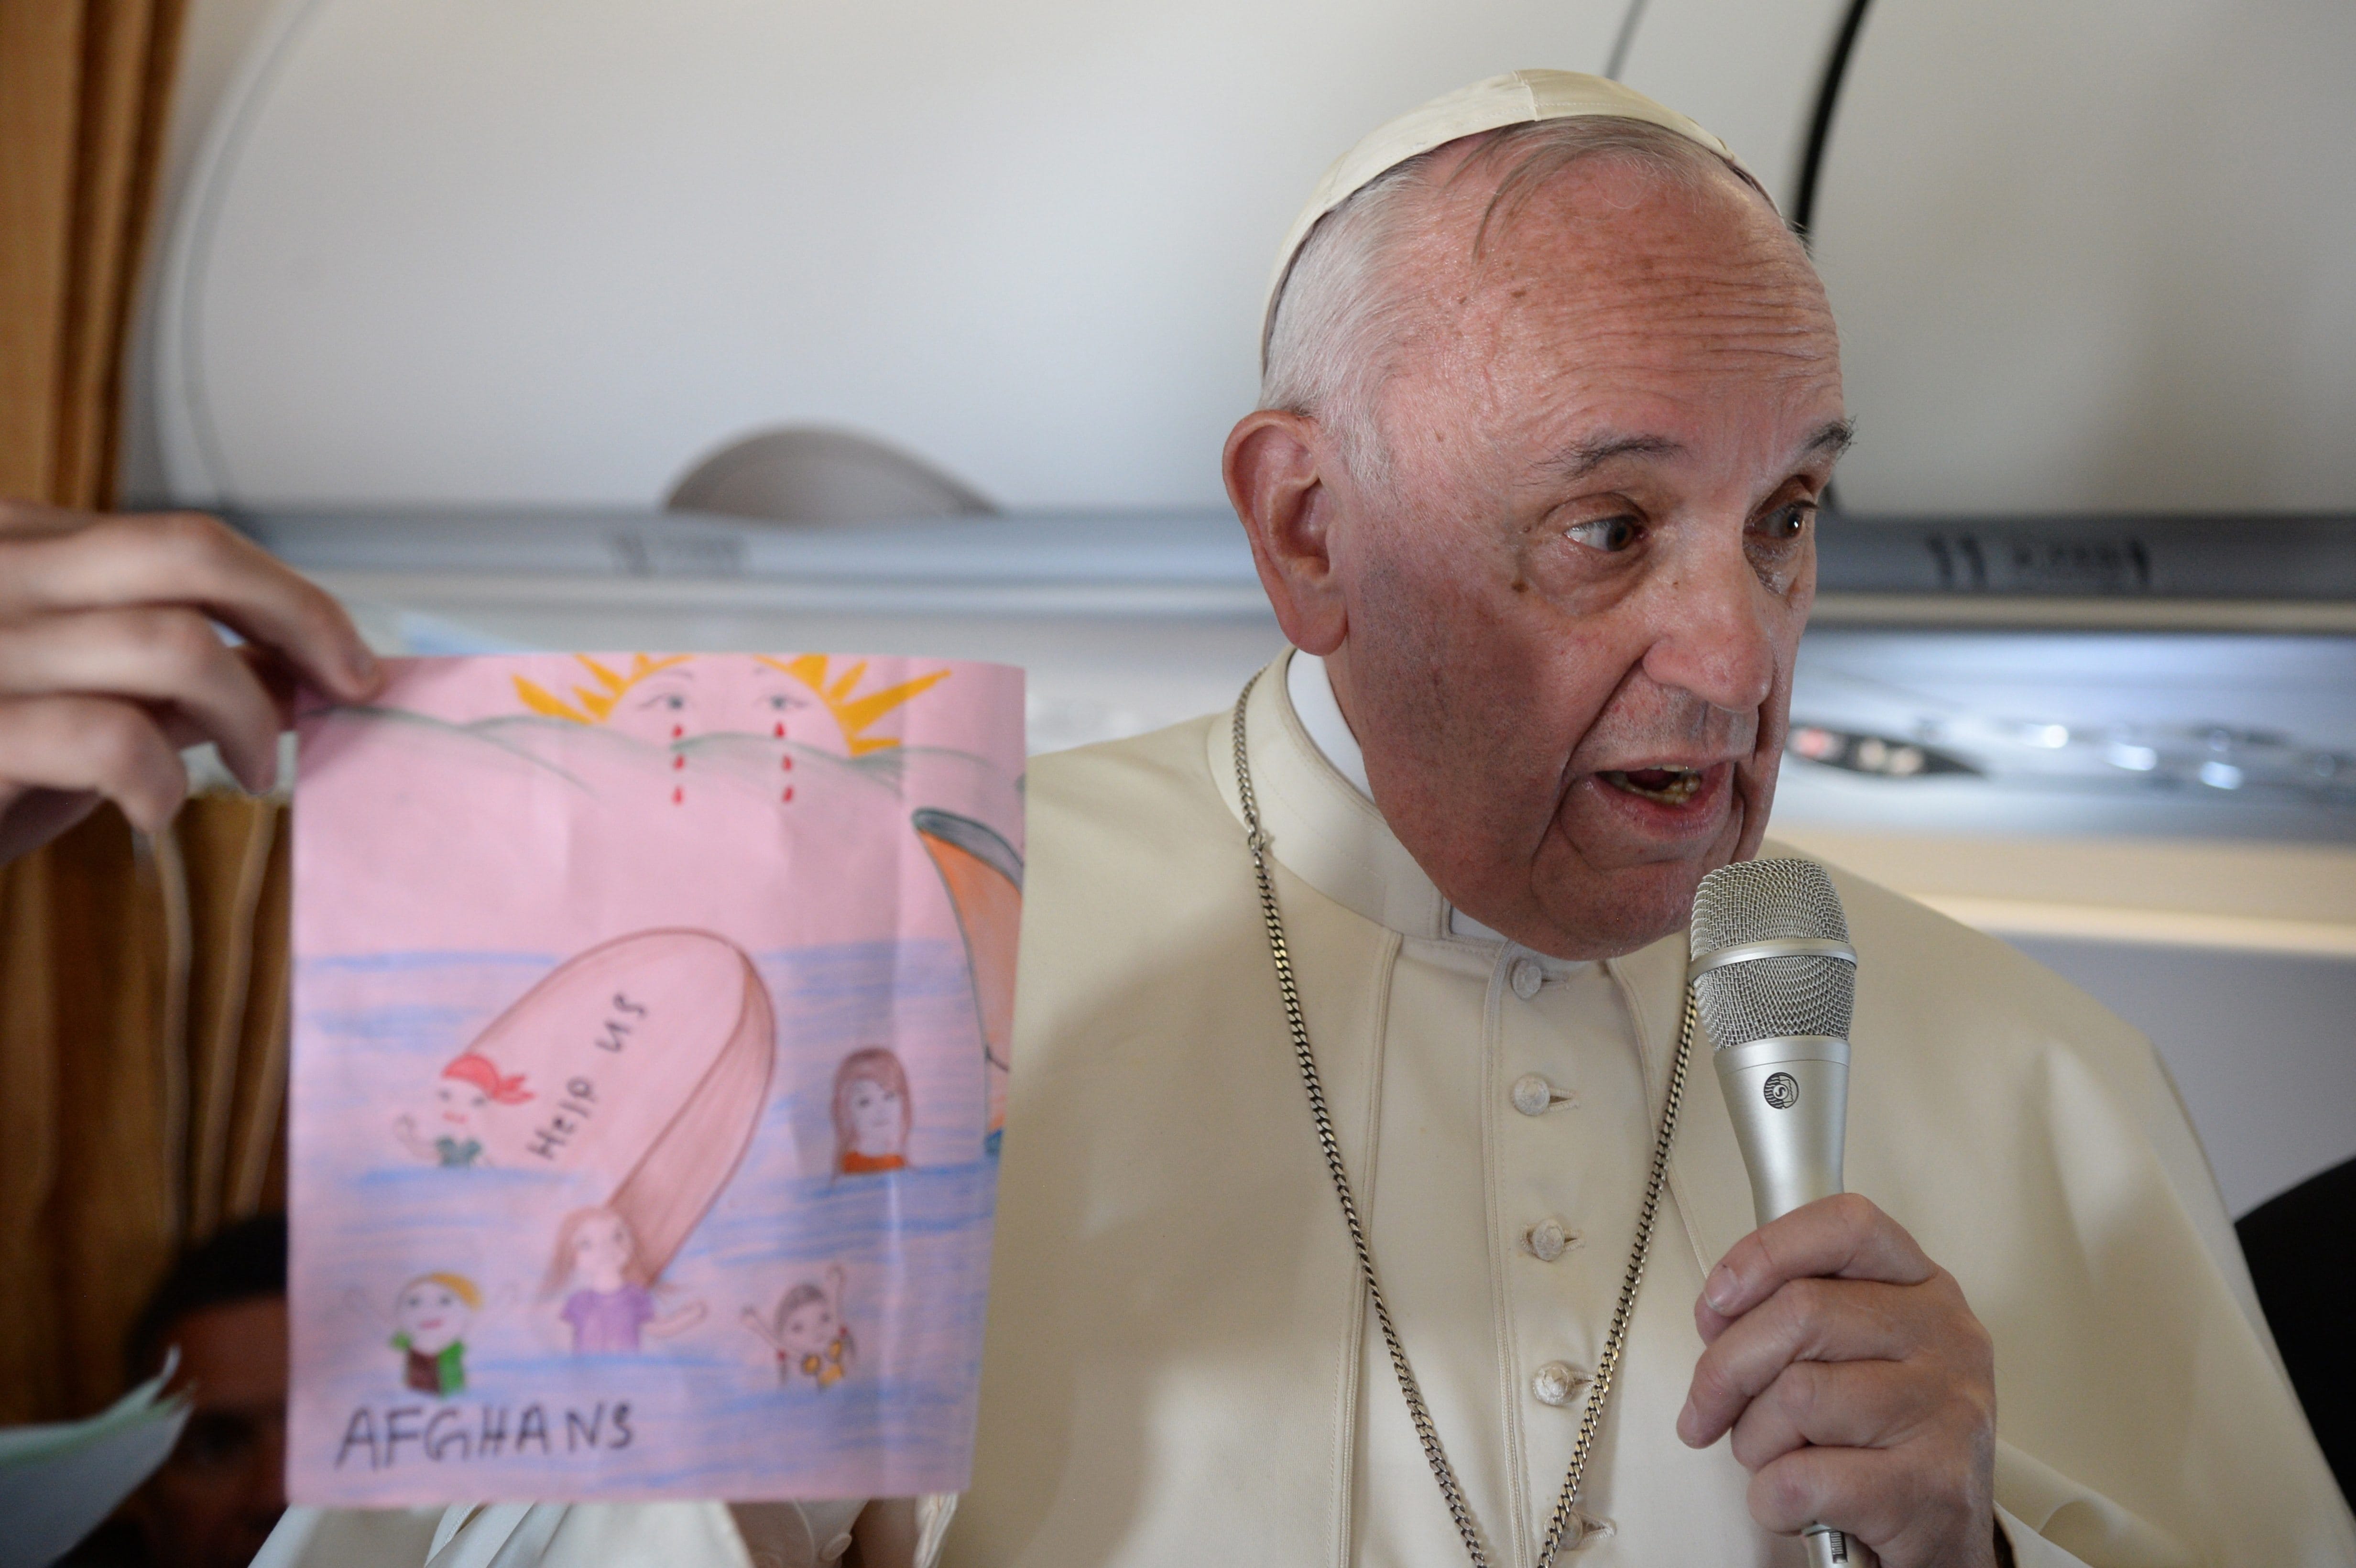 Pope Francis shows drawings made by children on his flight back to Rome following a visit to the Greek island of Lesbos, Saturday, April 16, 2016. Pope Francis gave Europe a provocative and concrete lesson in how to treat refugees Saturday by bringing home 12 Syrian Muslims aboard his charter plane after an emotional visit to the hard-hit Greek island of Lesbos.